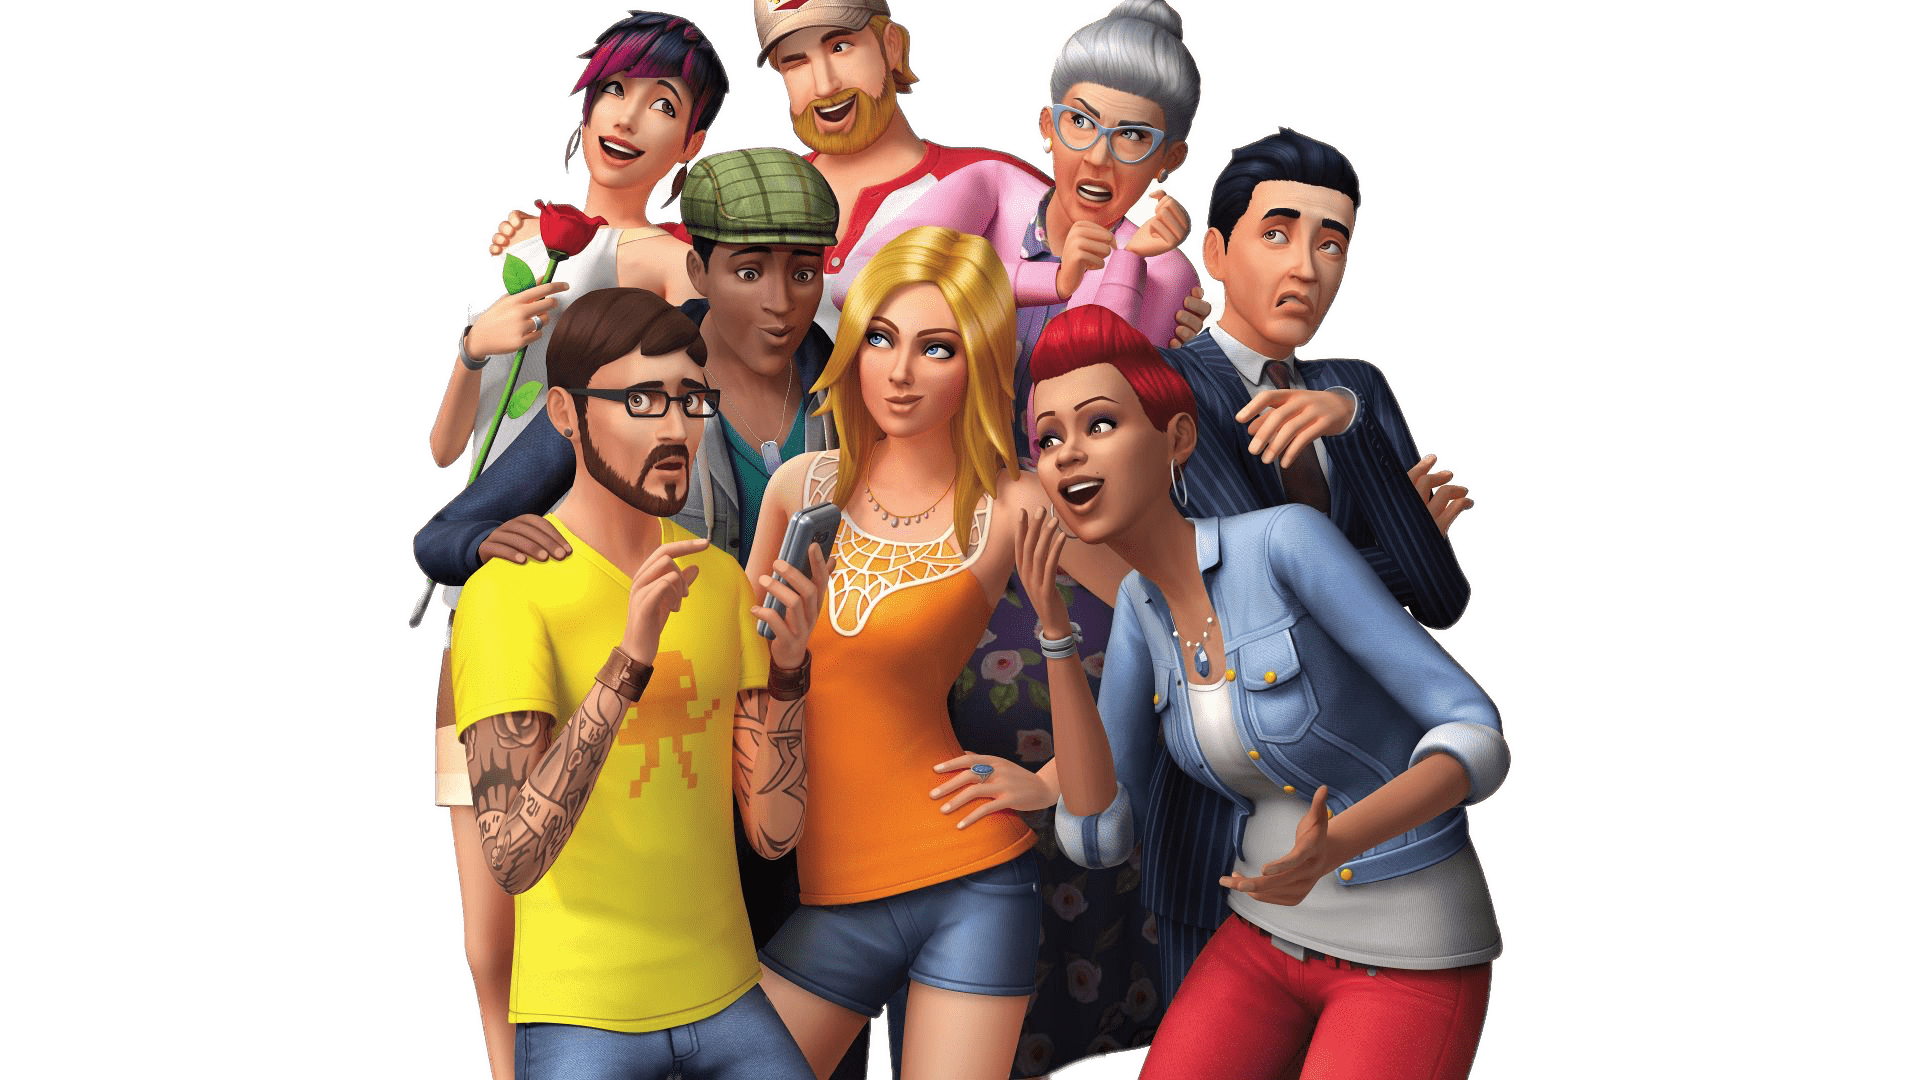 The Sims Characters PNG Pic